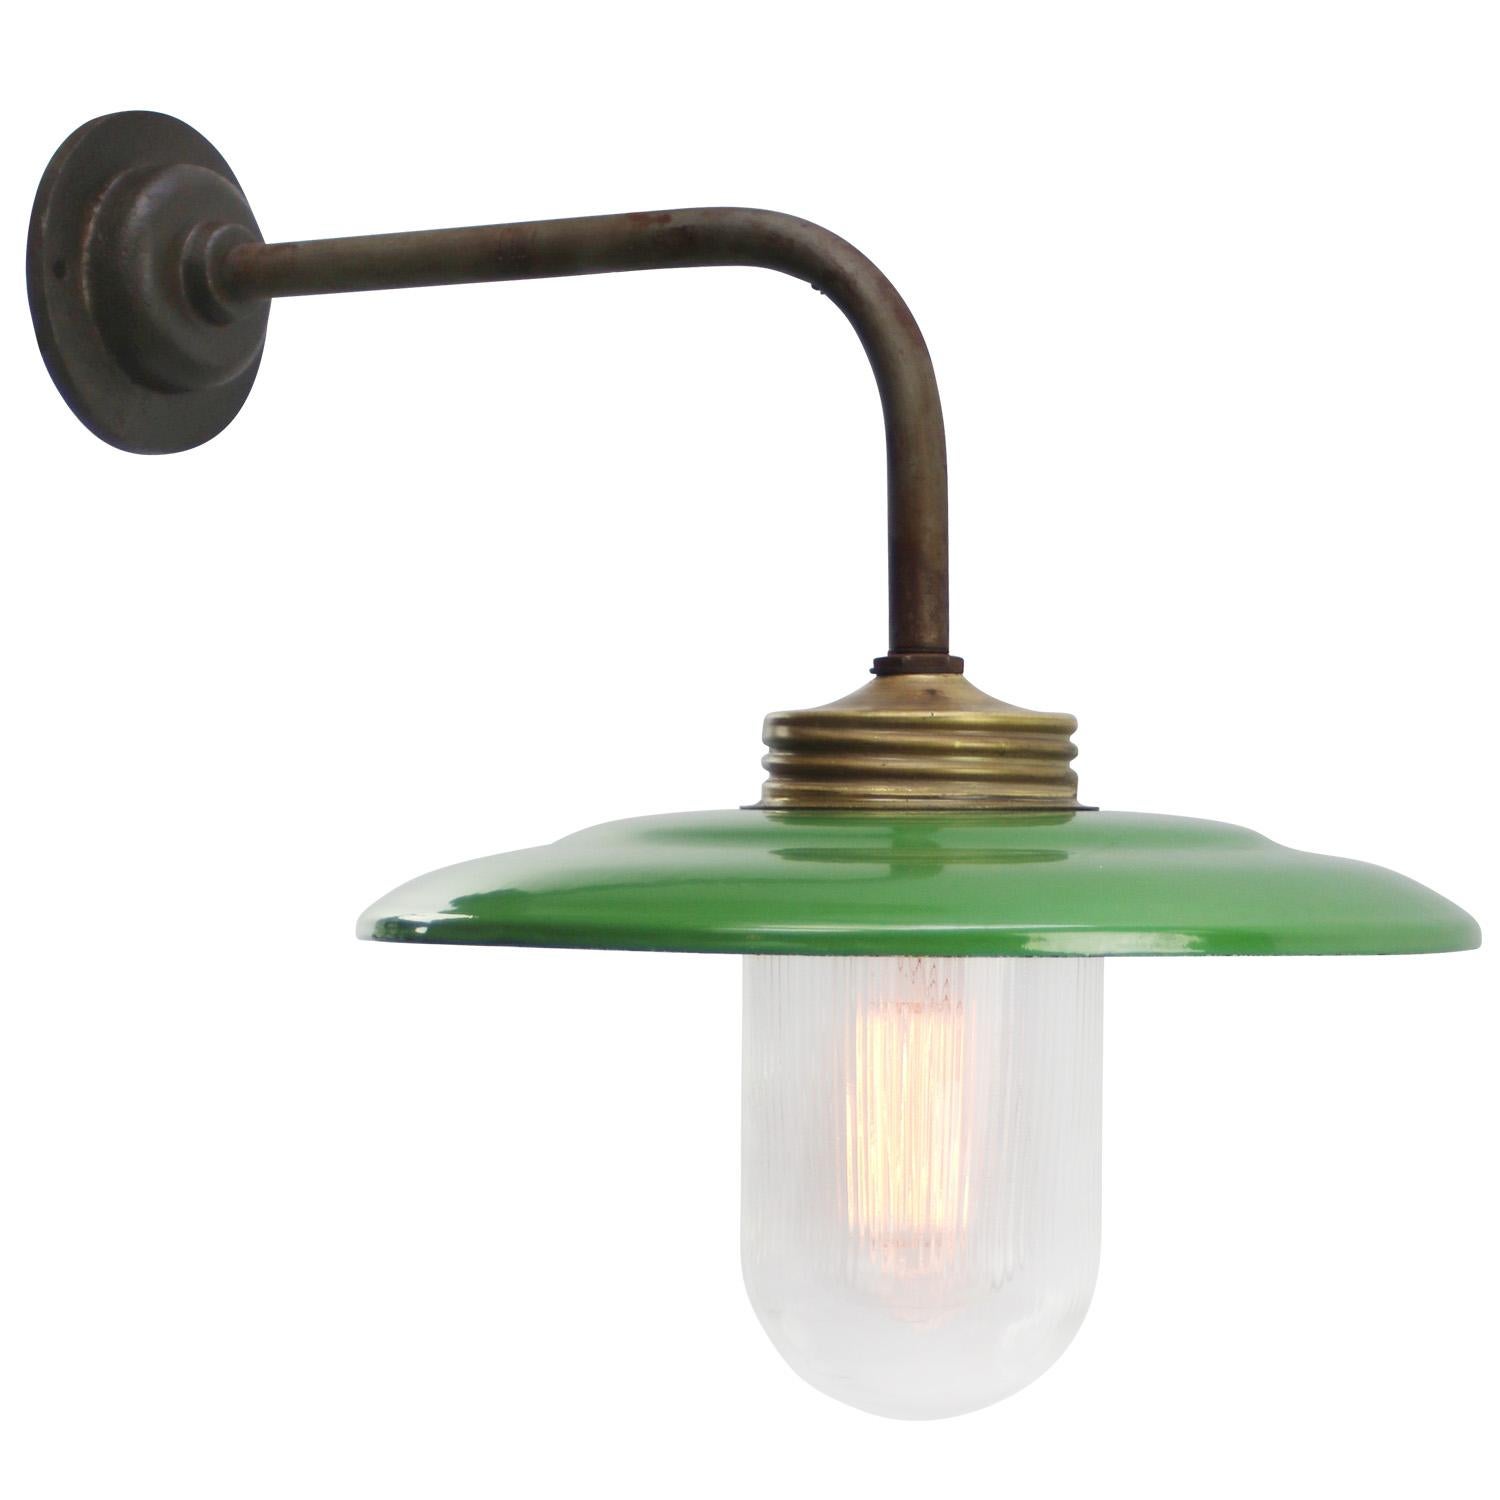 Rust Cast Iron Barn light
Green enamel, white interior, clear striped glass

Diameter cast iron wall piece: 10.5 cm / 4 inches
2 holes to secure

Weight: 2.00 kg / 4.4 lb

Priced per individual item. All lamps have been made suitable by